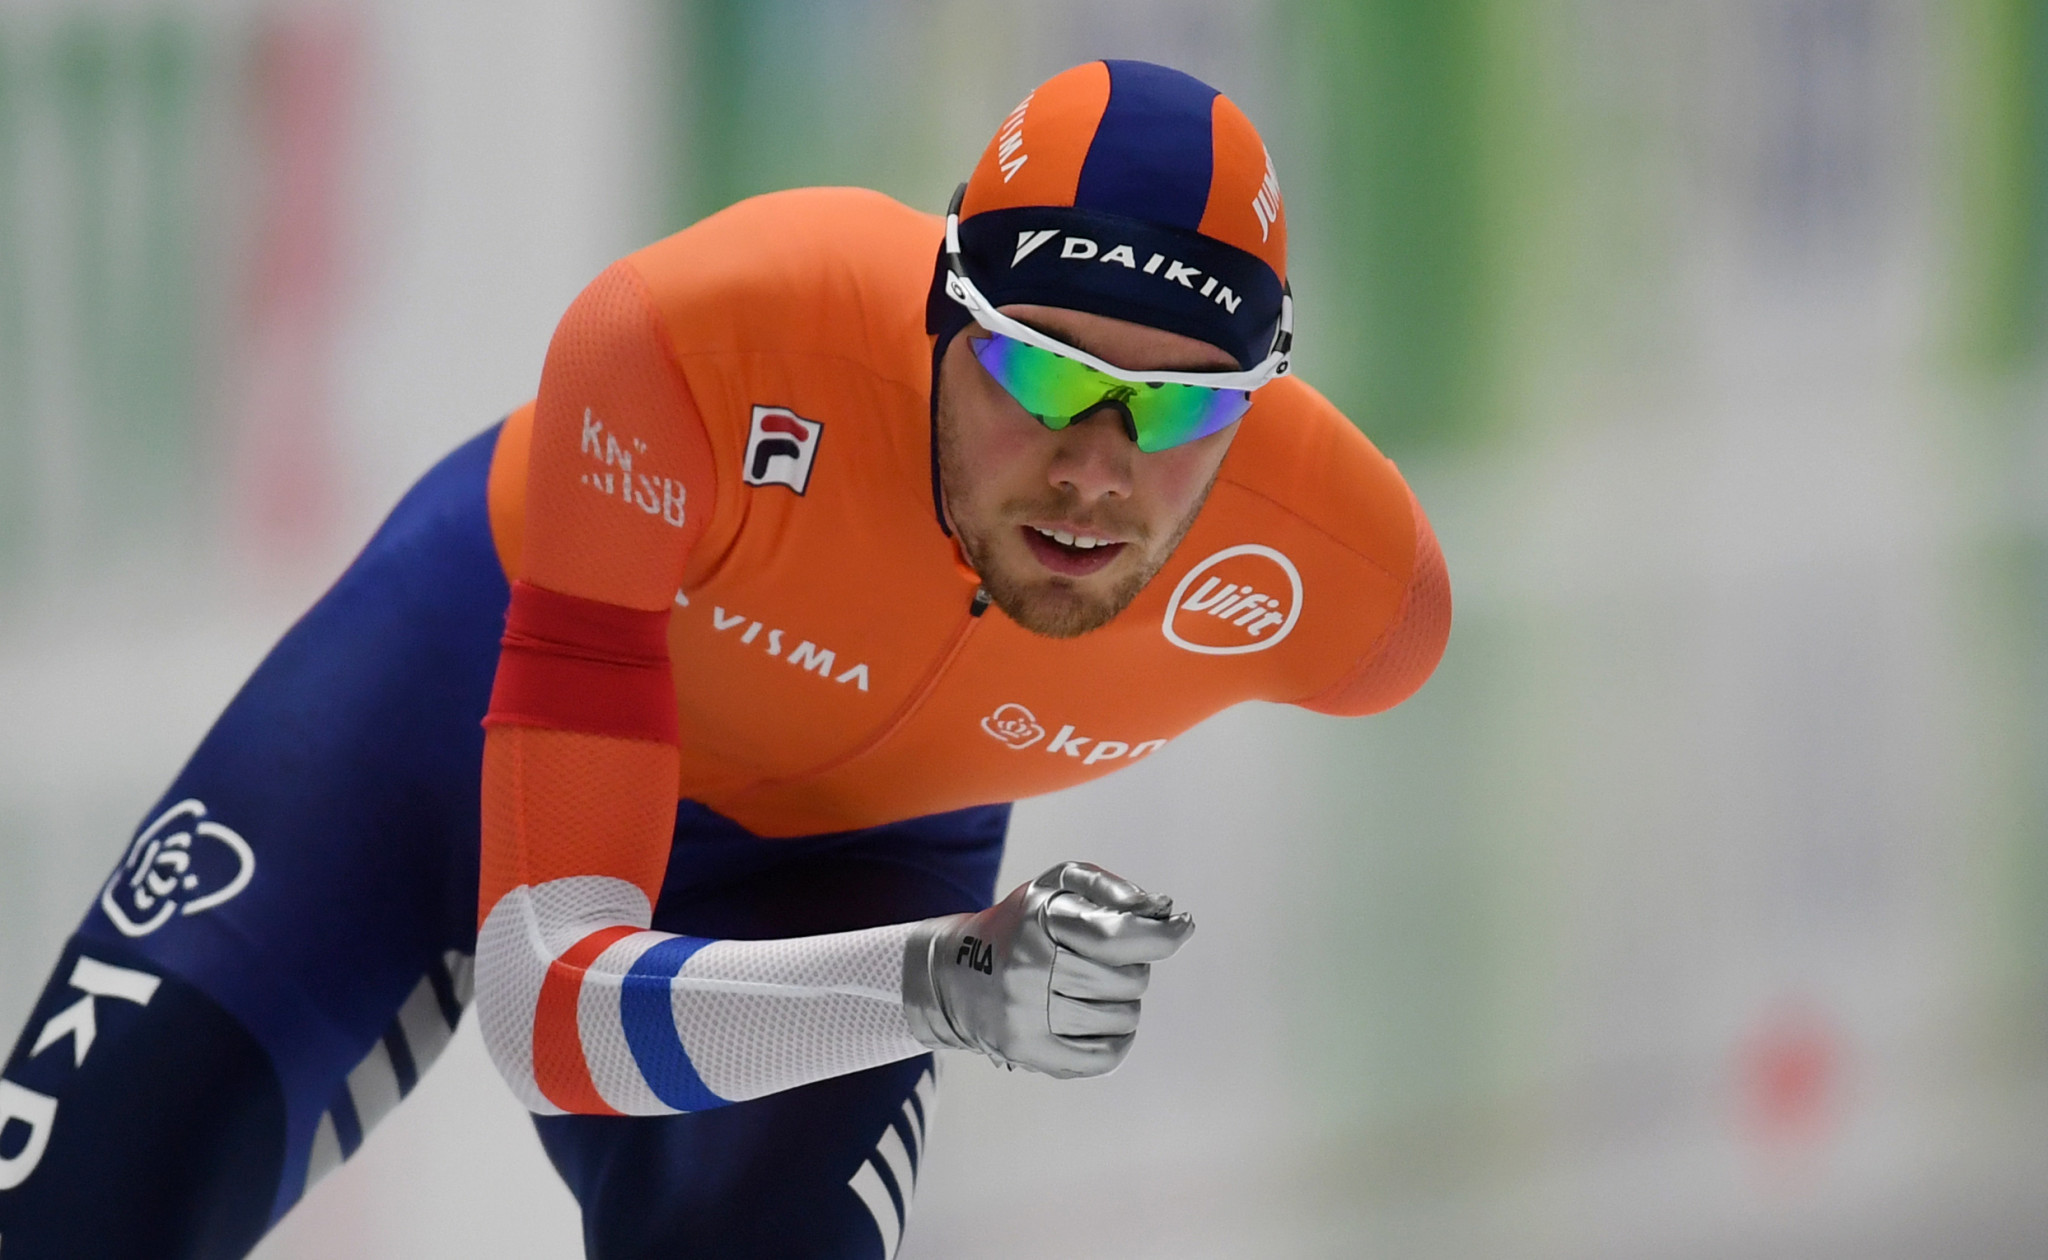 Patrick Roest set a track record in the men's 5000m race at the ISU Speed Skating World Cup in Minsk ©Getty Images